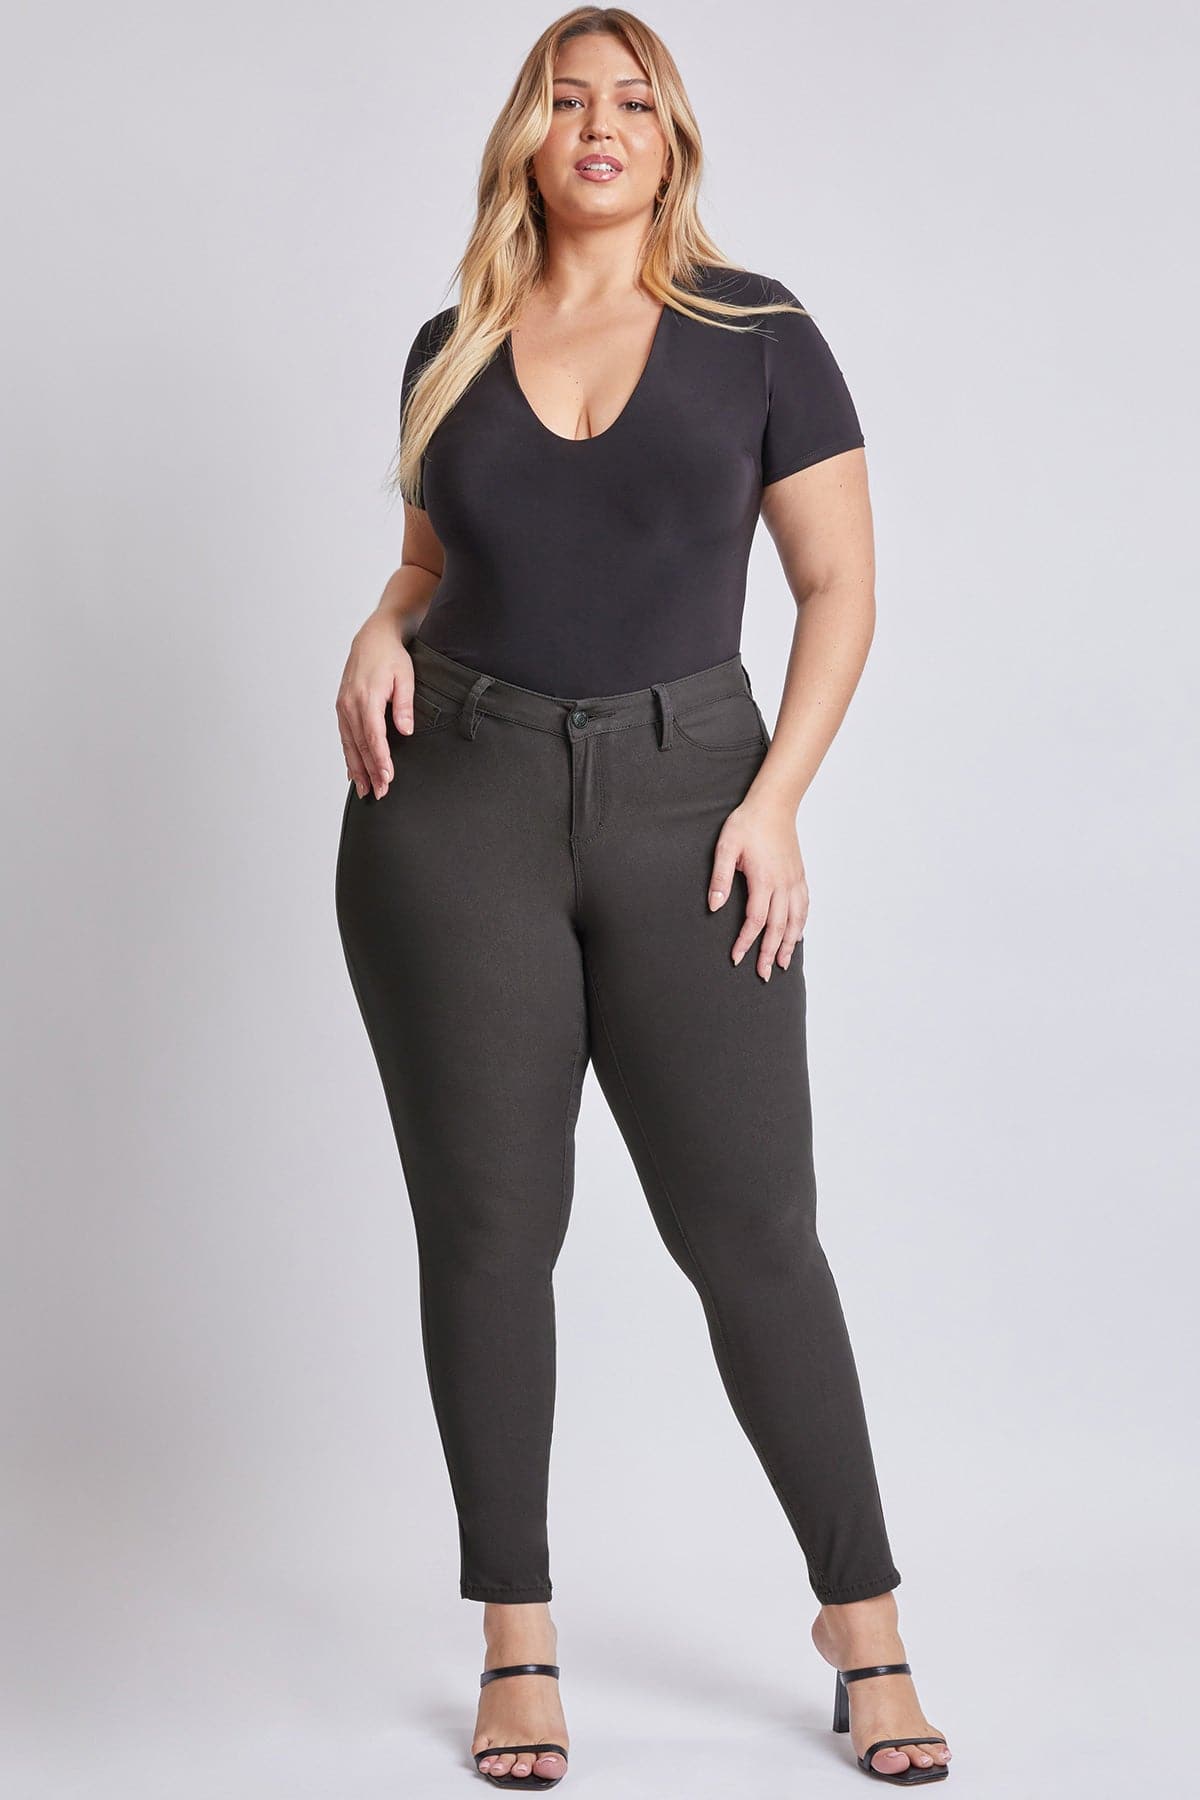 Women's Plus Size Forever Mid Rise Pants from YMI – YMI JEANS